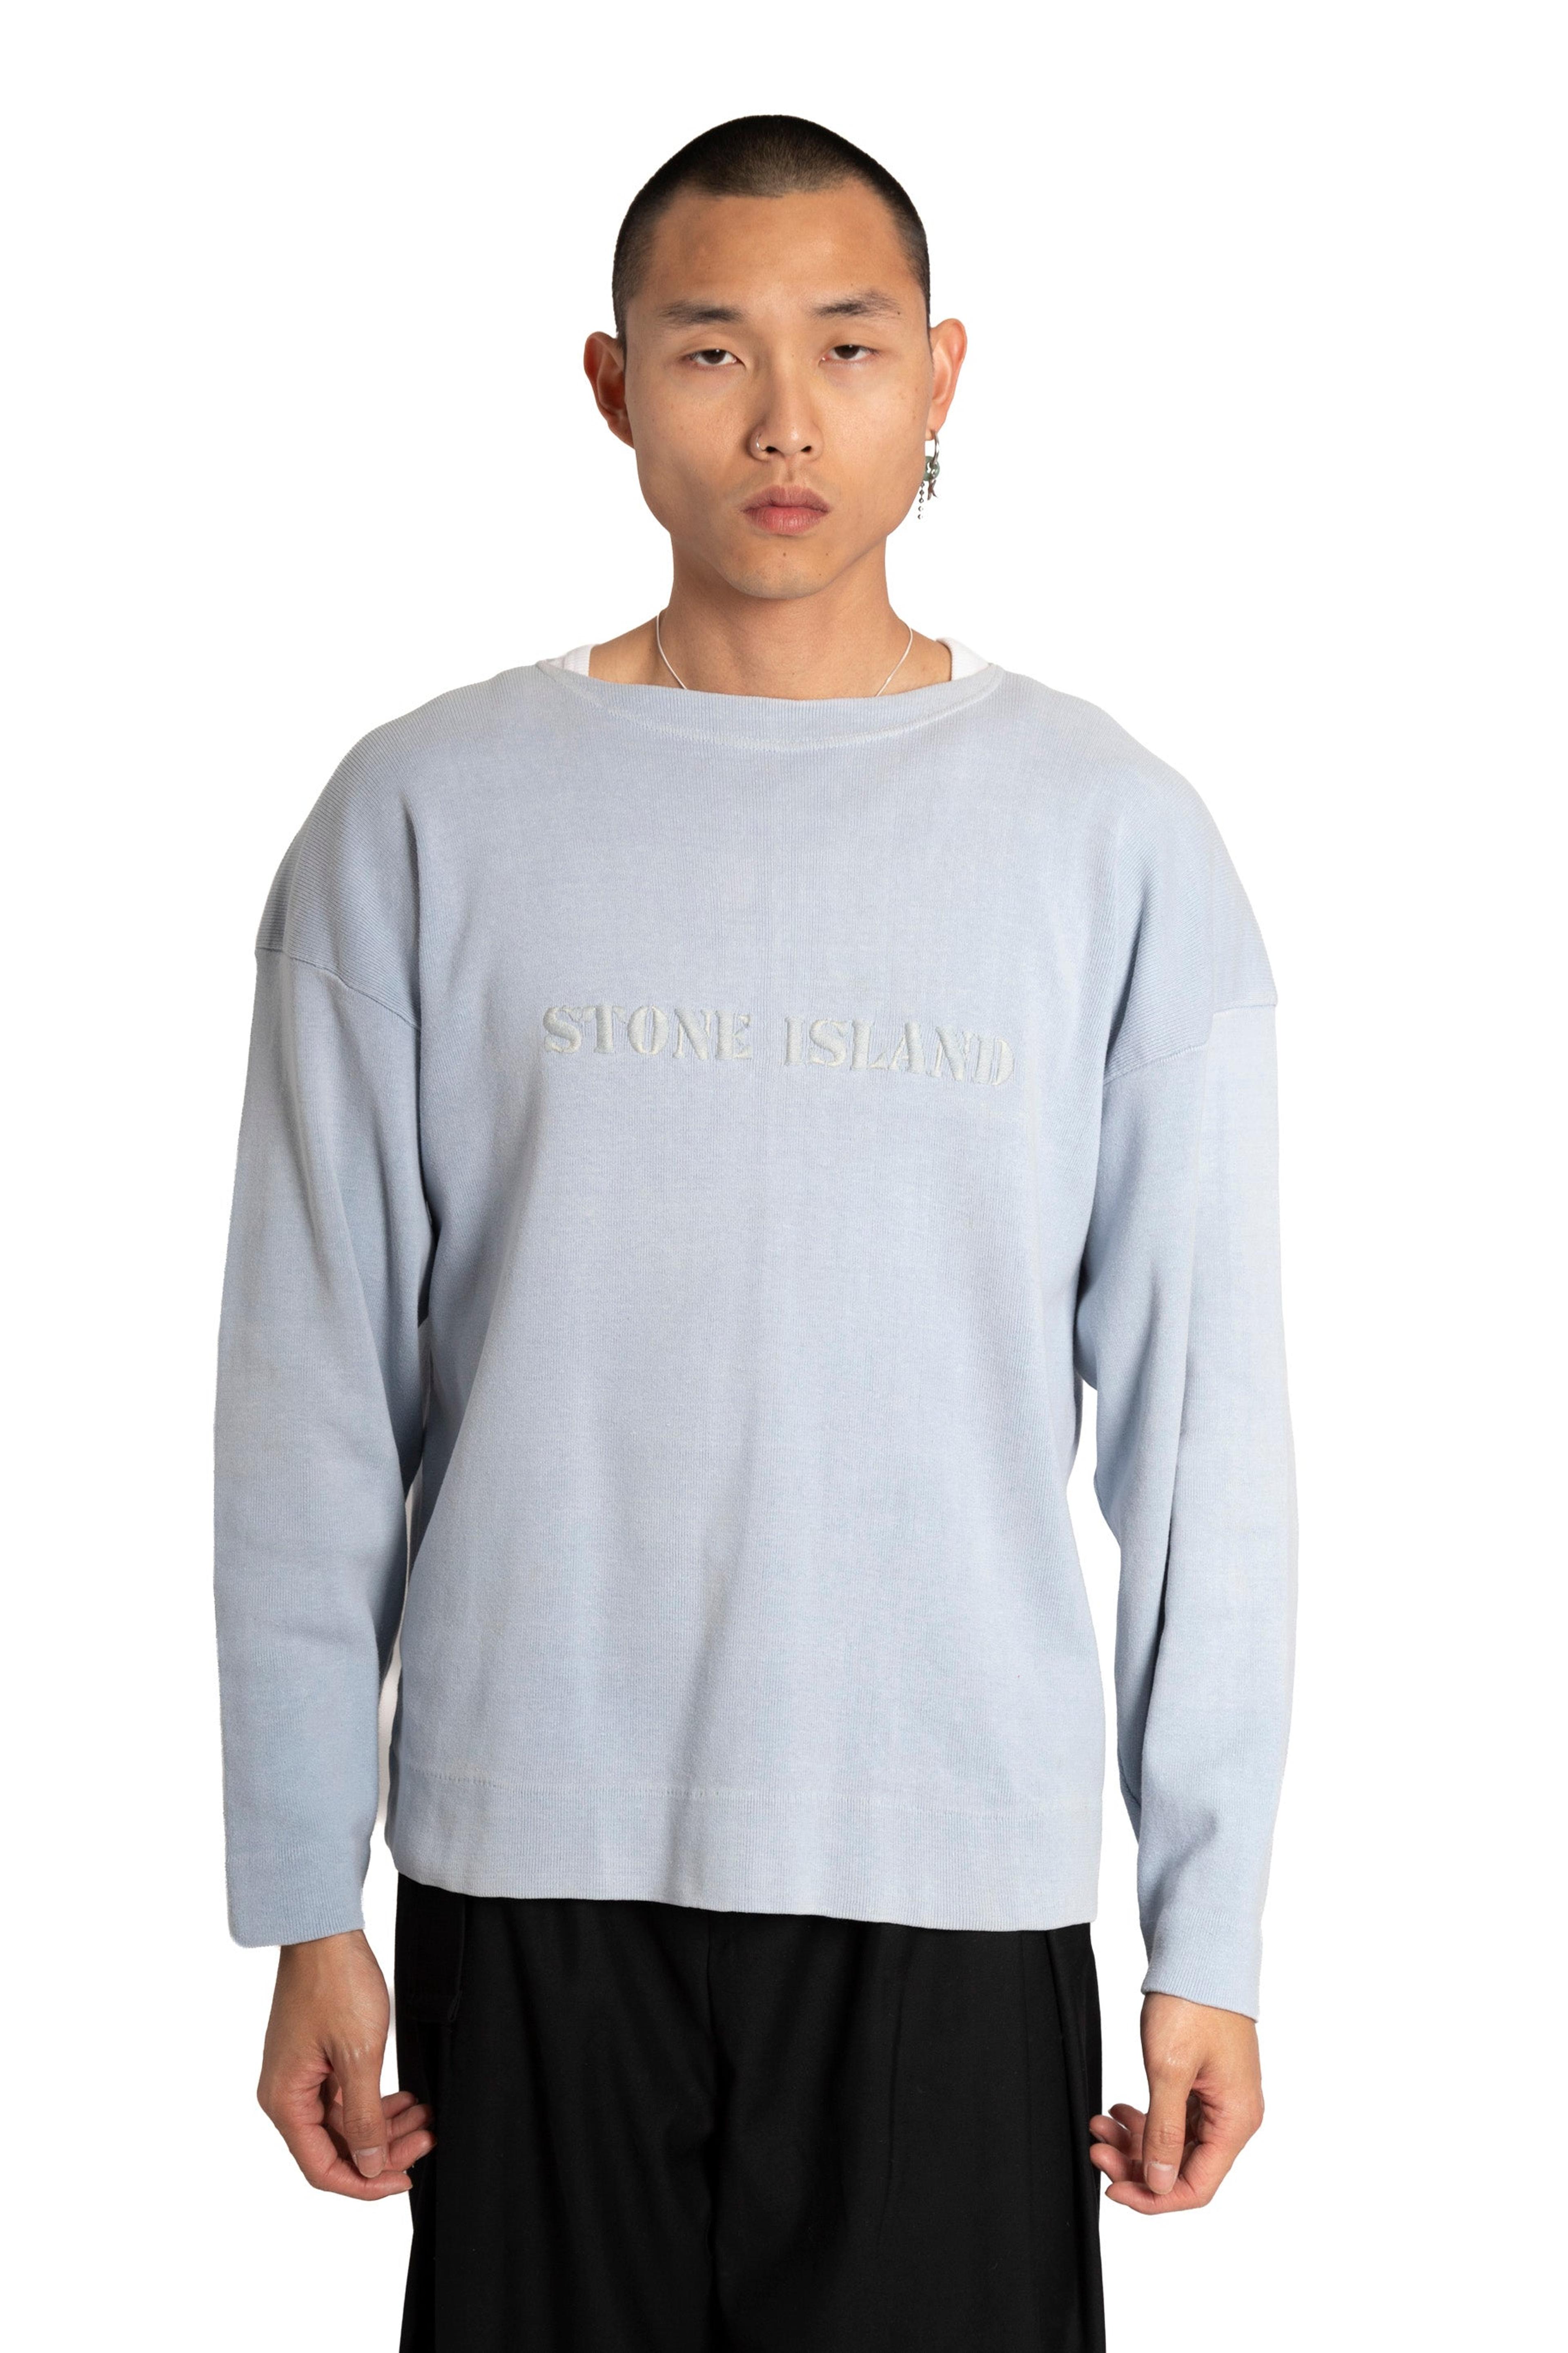 Stone Island 80s Spellout Sweater